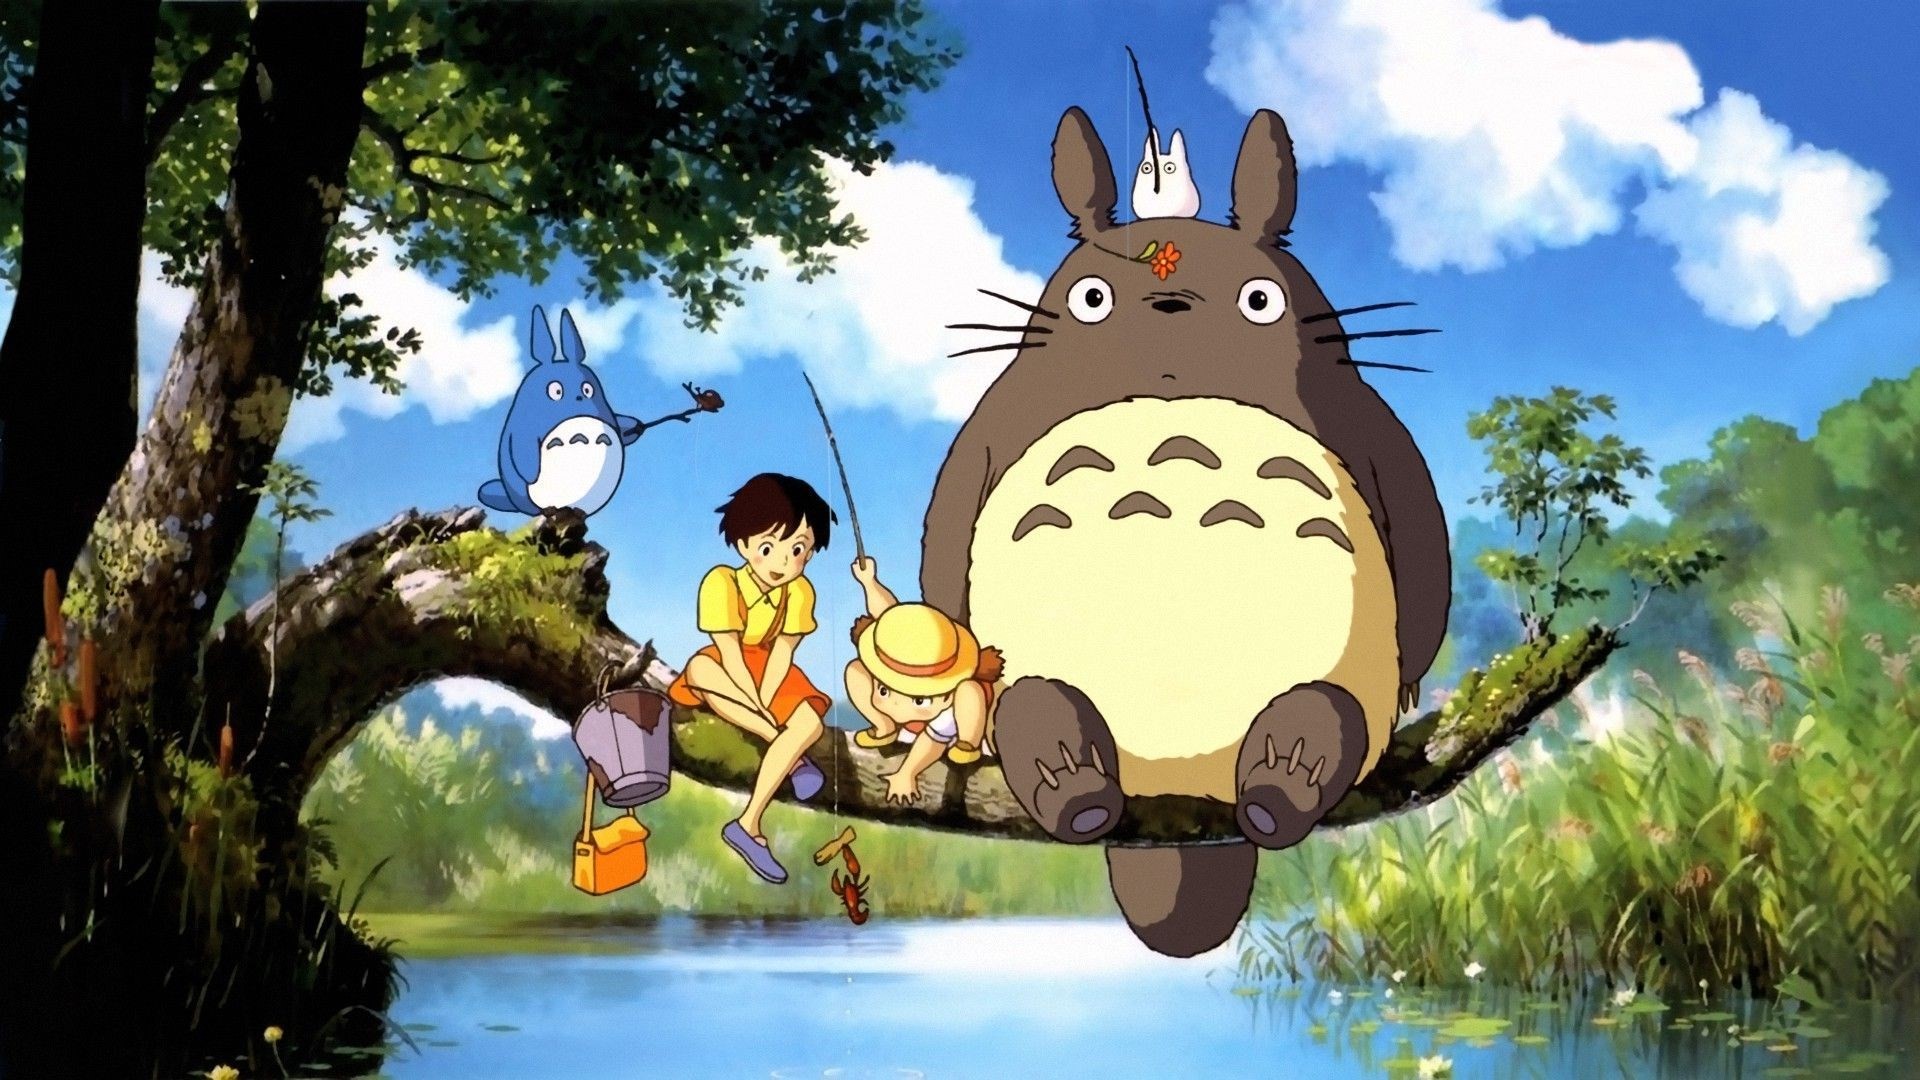 A Studio Ghibli animator is giving free Totoro drawing lessons online |  Dazed